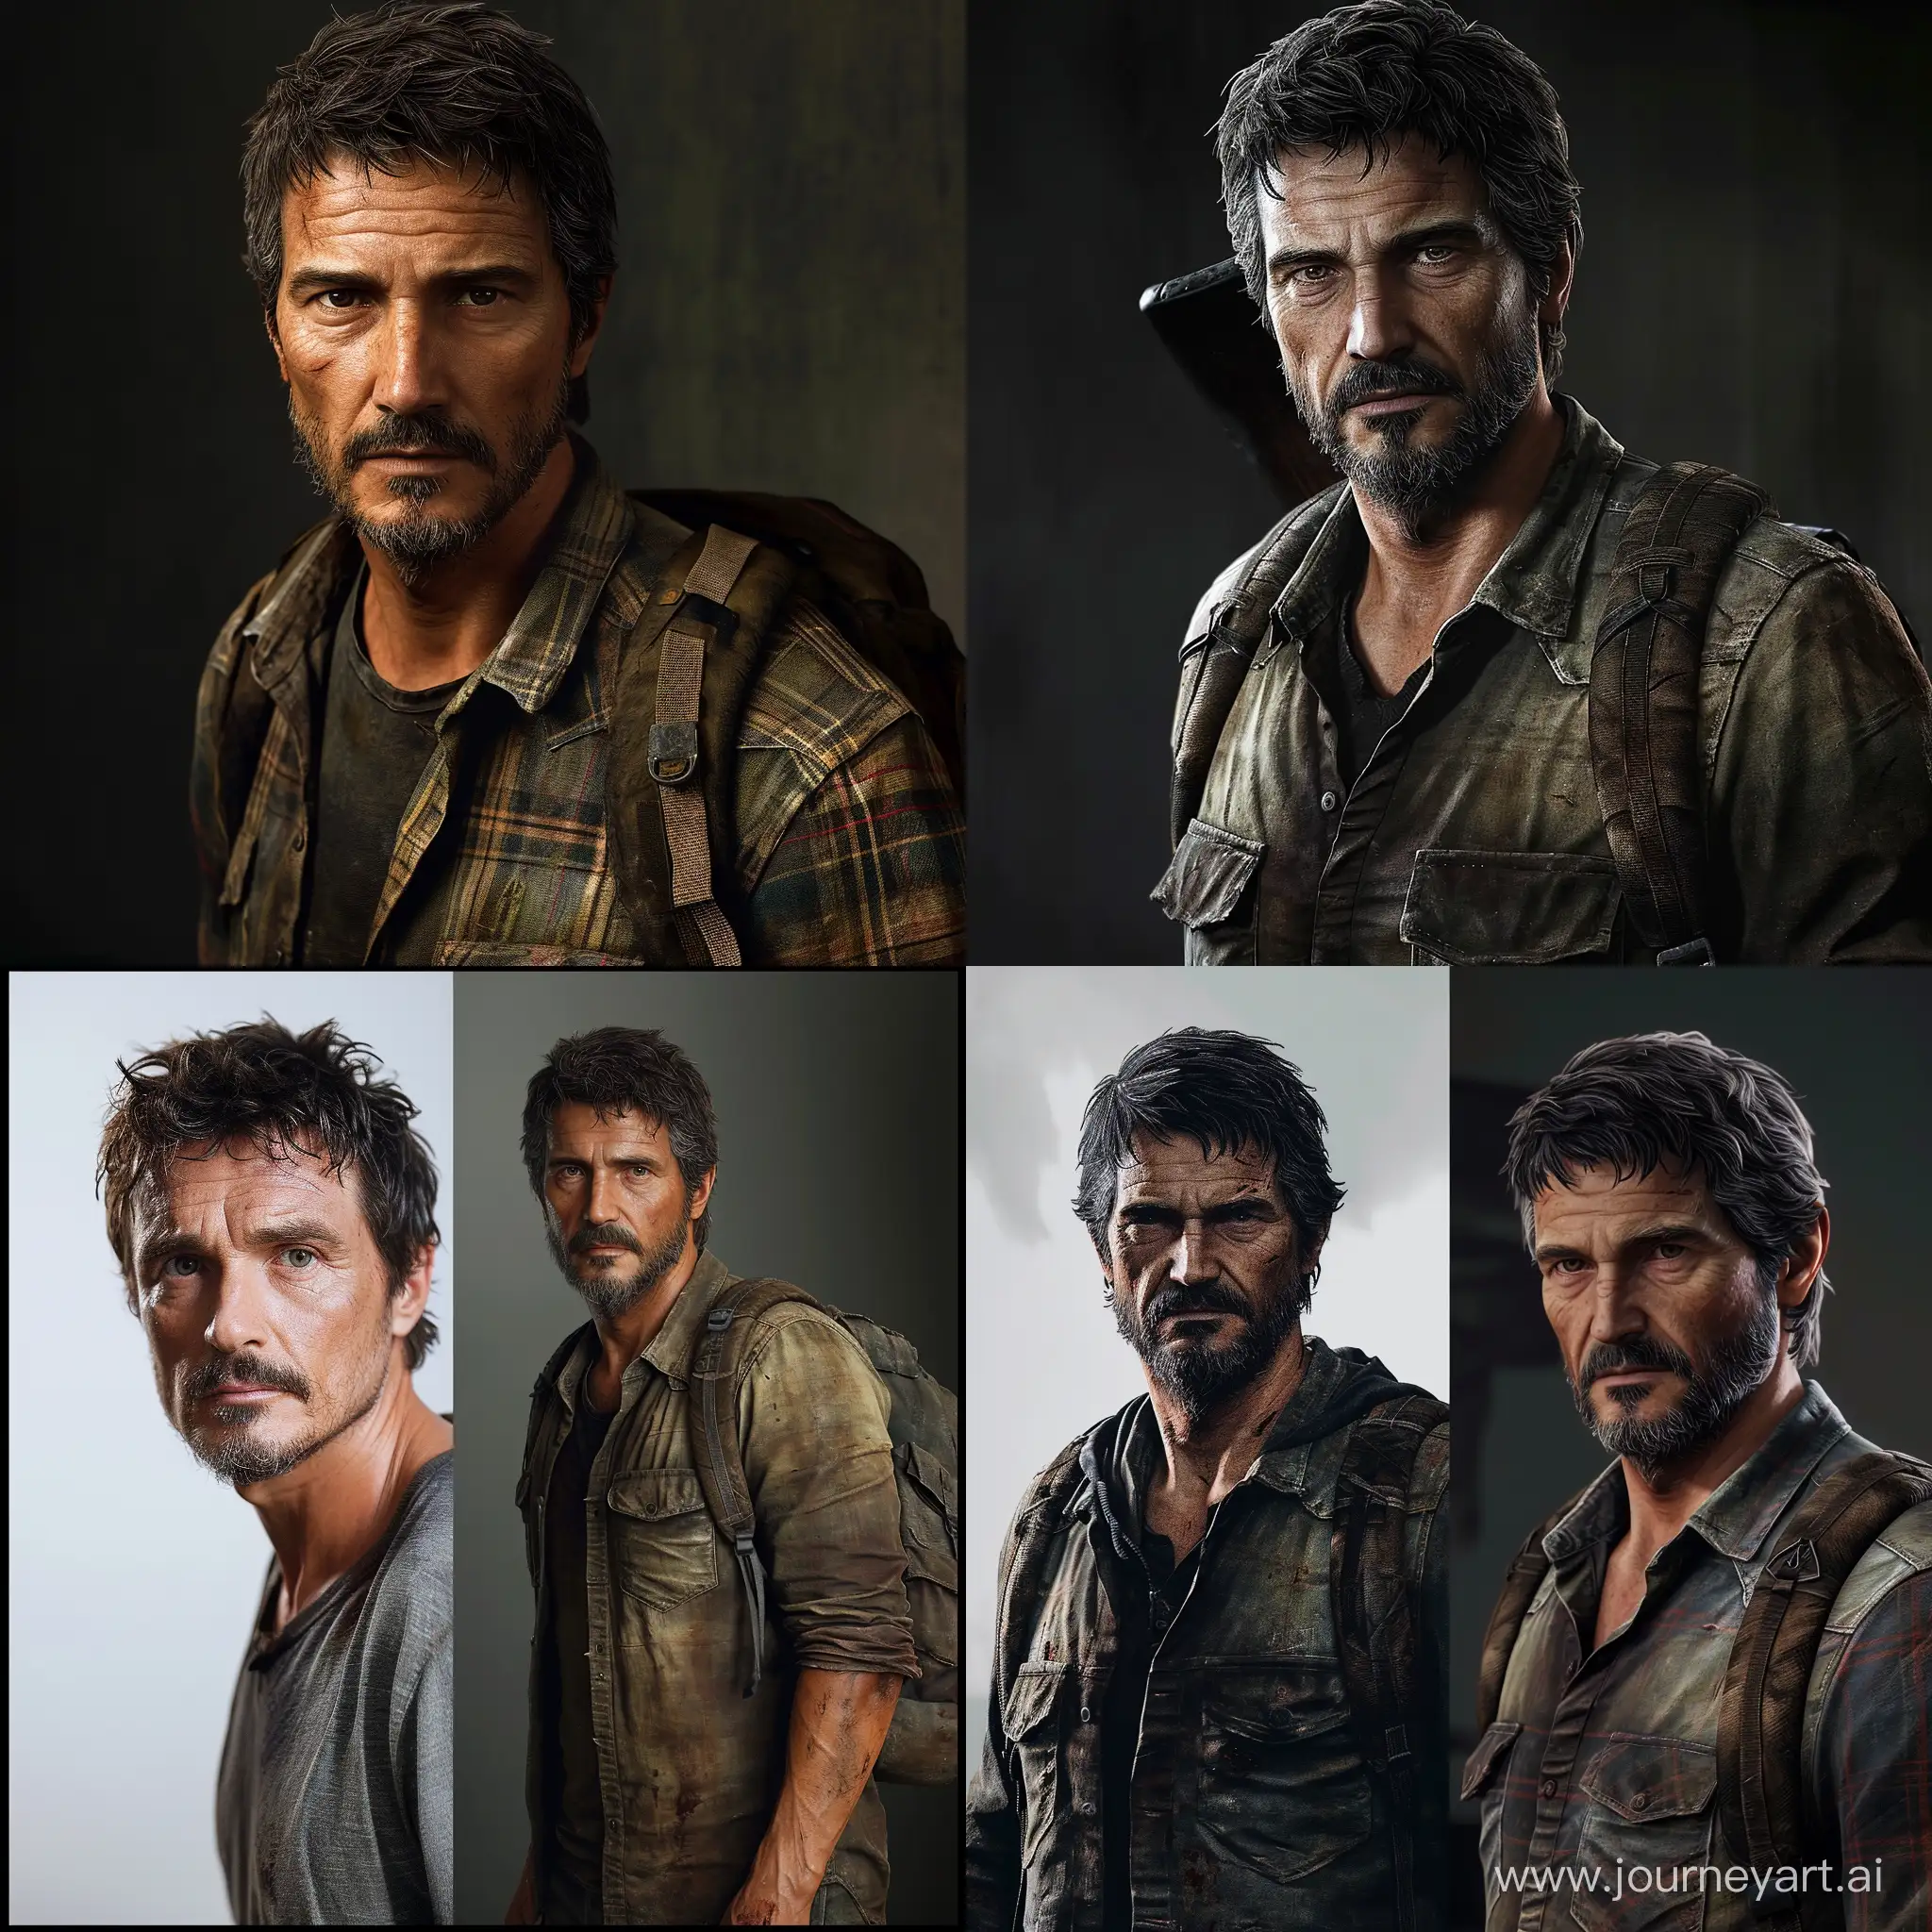 Pedro pascal as Joel The Last of Us 